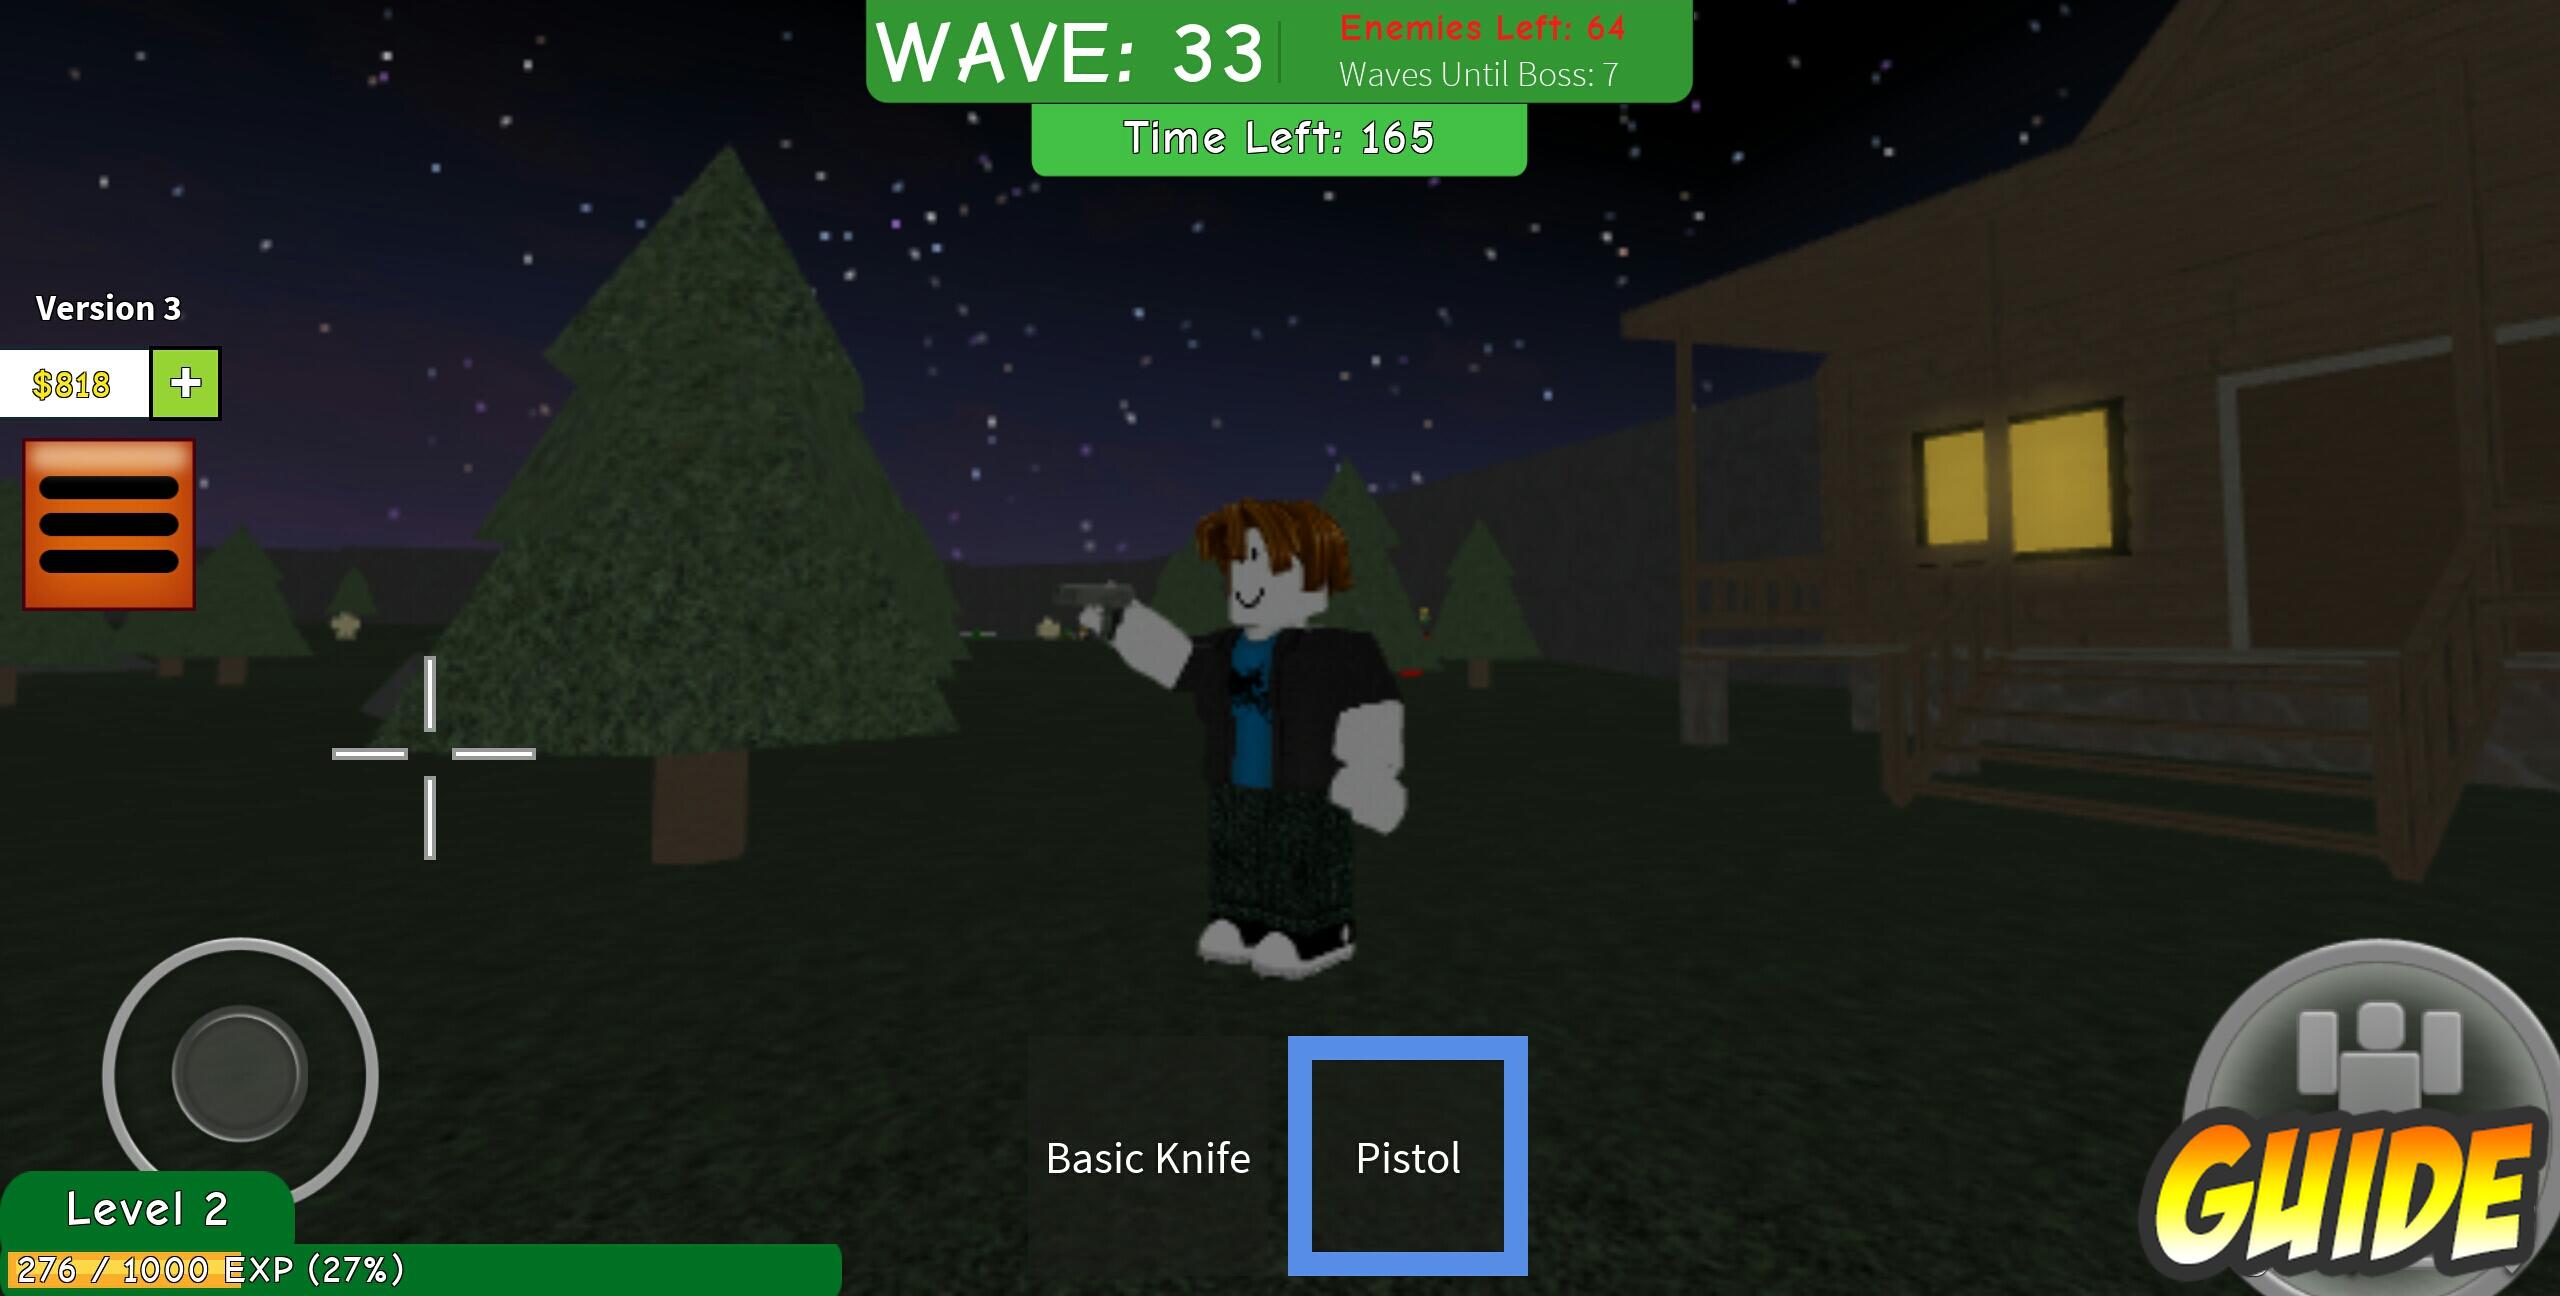 Guide Zombie Attack Roblox For Android Apk Download - 7 best roblox images zombie attack waves after waves